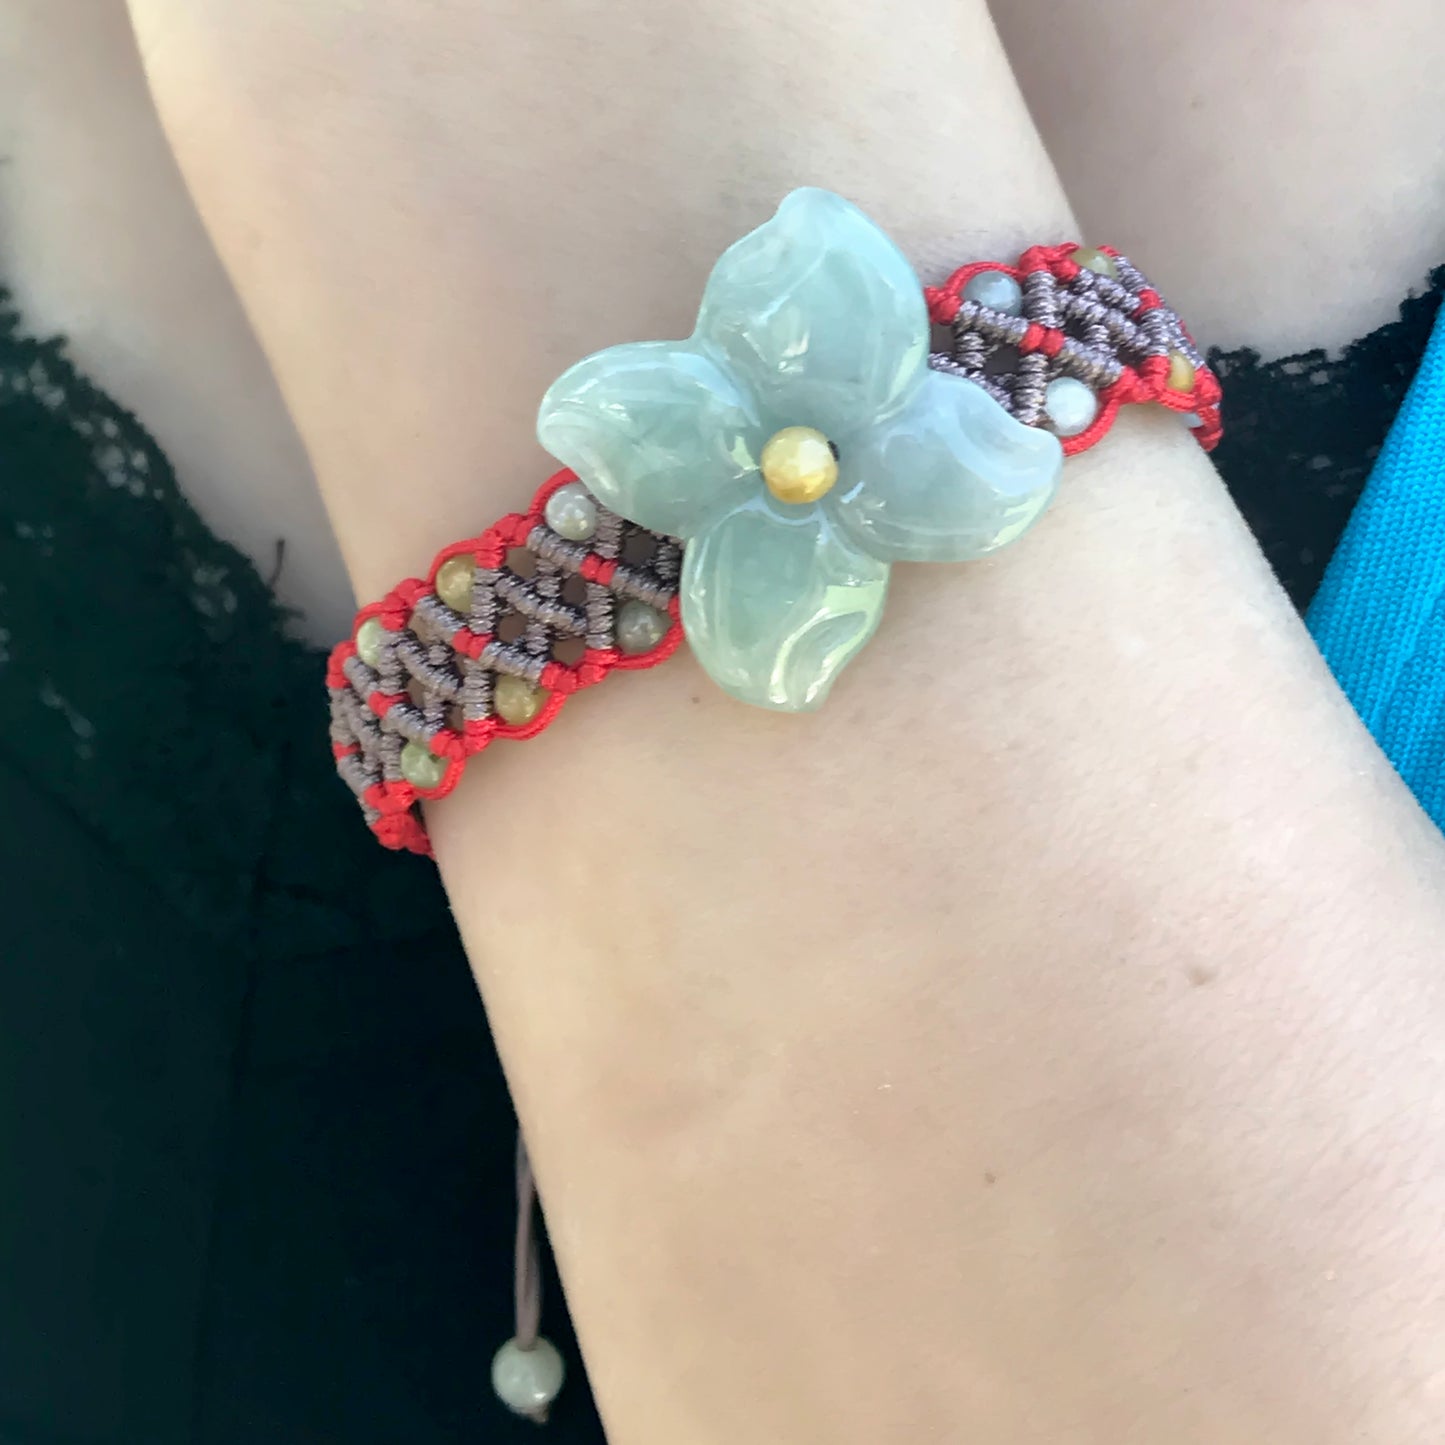 Look Gorgeous with the Peruvian Lily Flower Bracelet made with Red Cord